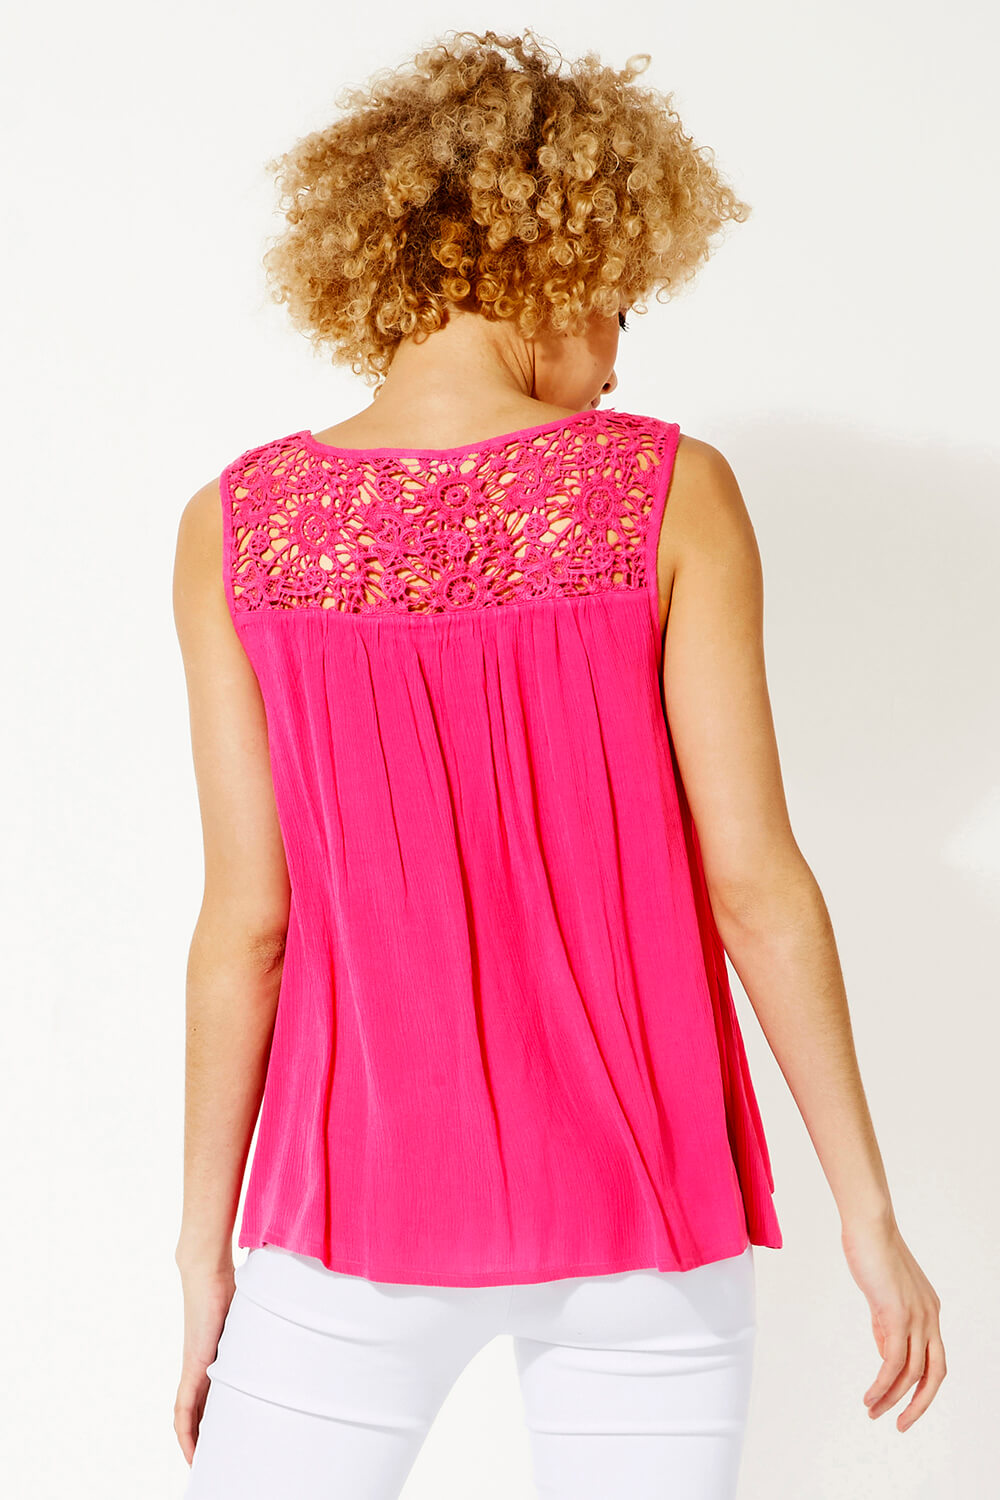 PINK Lace Back Keyhole Detail Top, Image 4 of 5